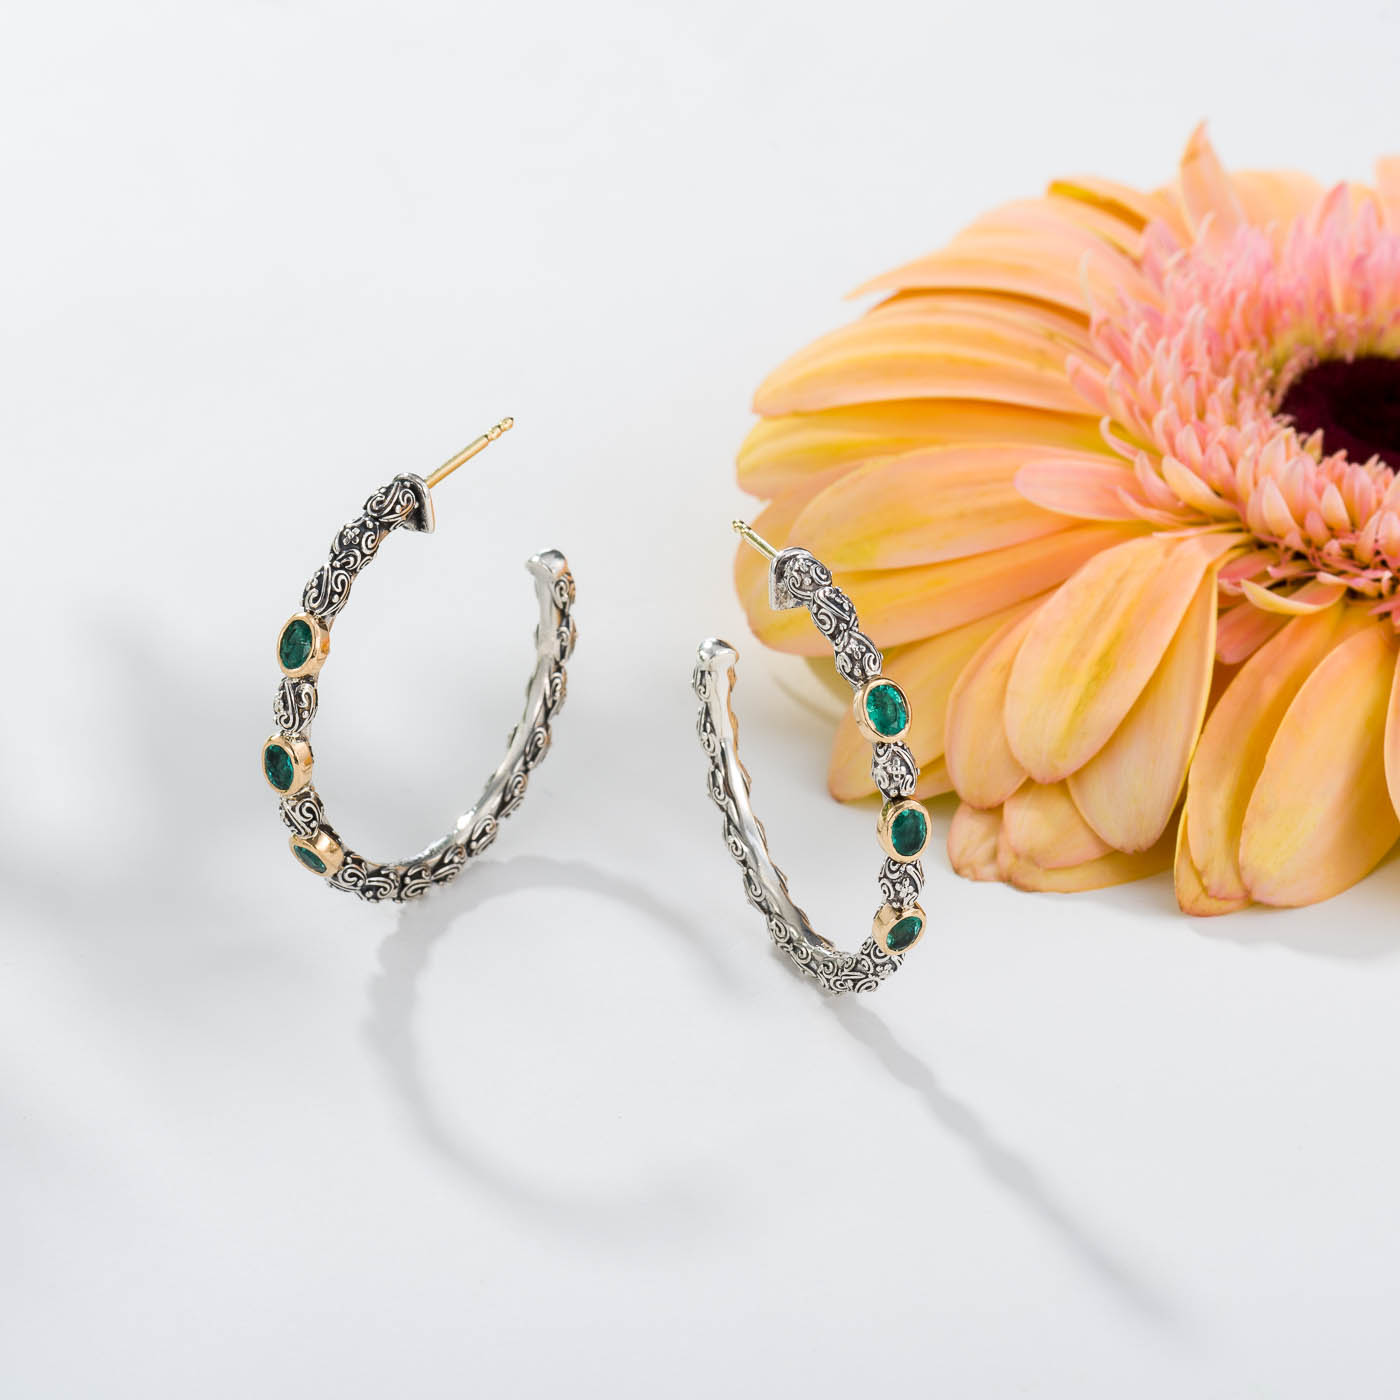 Eden's Garden Hoops Earrings in Sterling Silver with 18K Gold and Gemstones